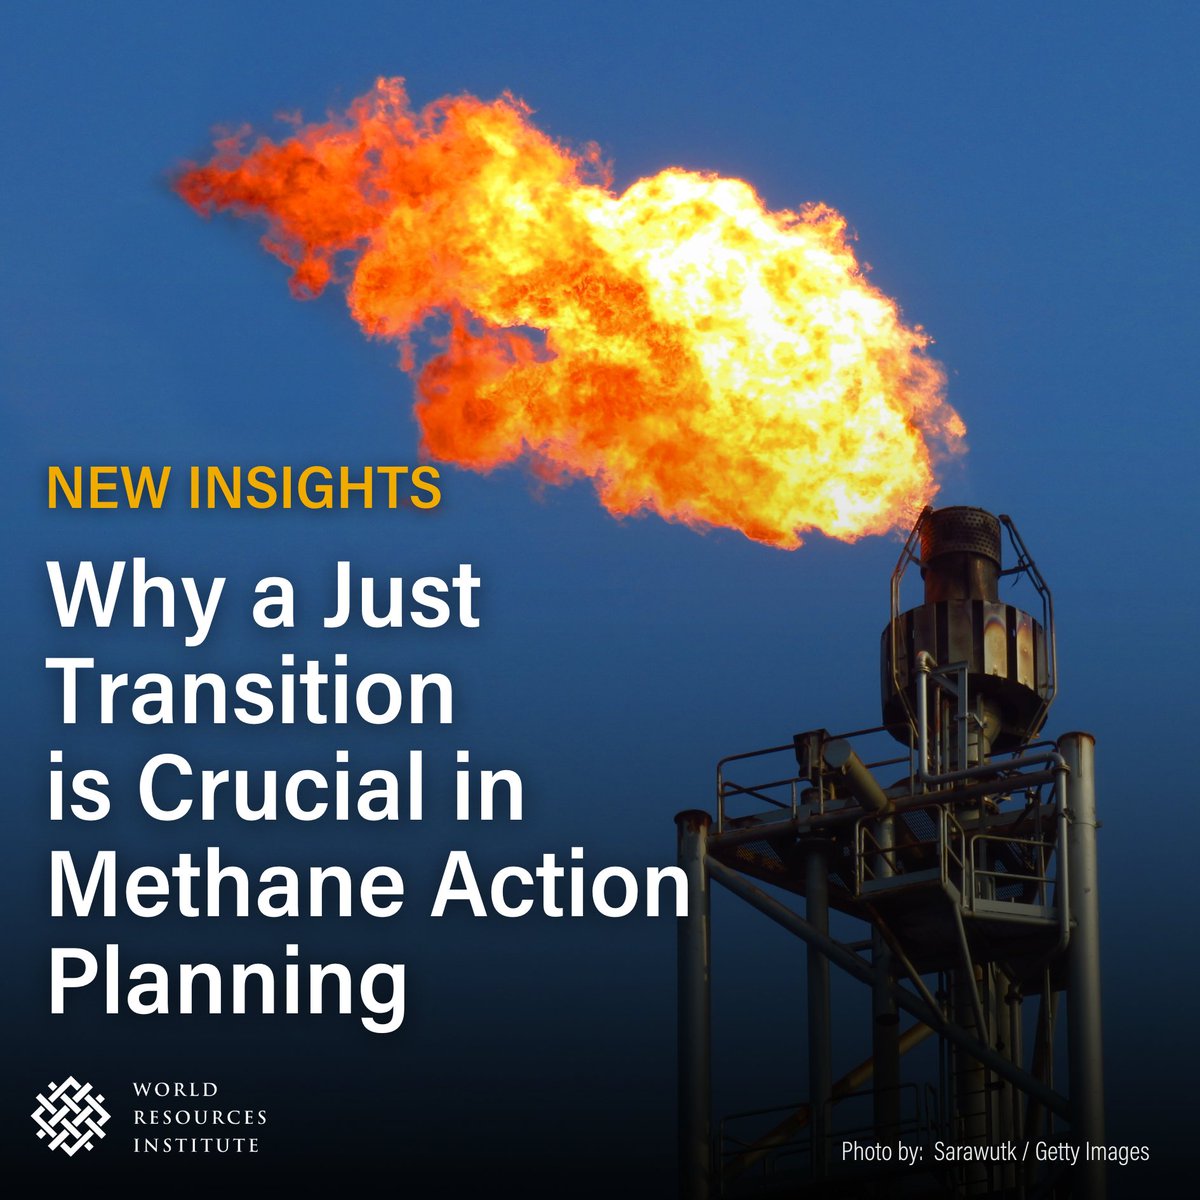 To keep temperature rise below 1.5°C, #fossilfuel operations must reduce their methane emissions by 75% by 2030. 📉 

New research from WRI Climate looks at why a #justtransition is crucial to methane action planning: bit.ly/443sNJH